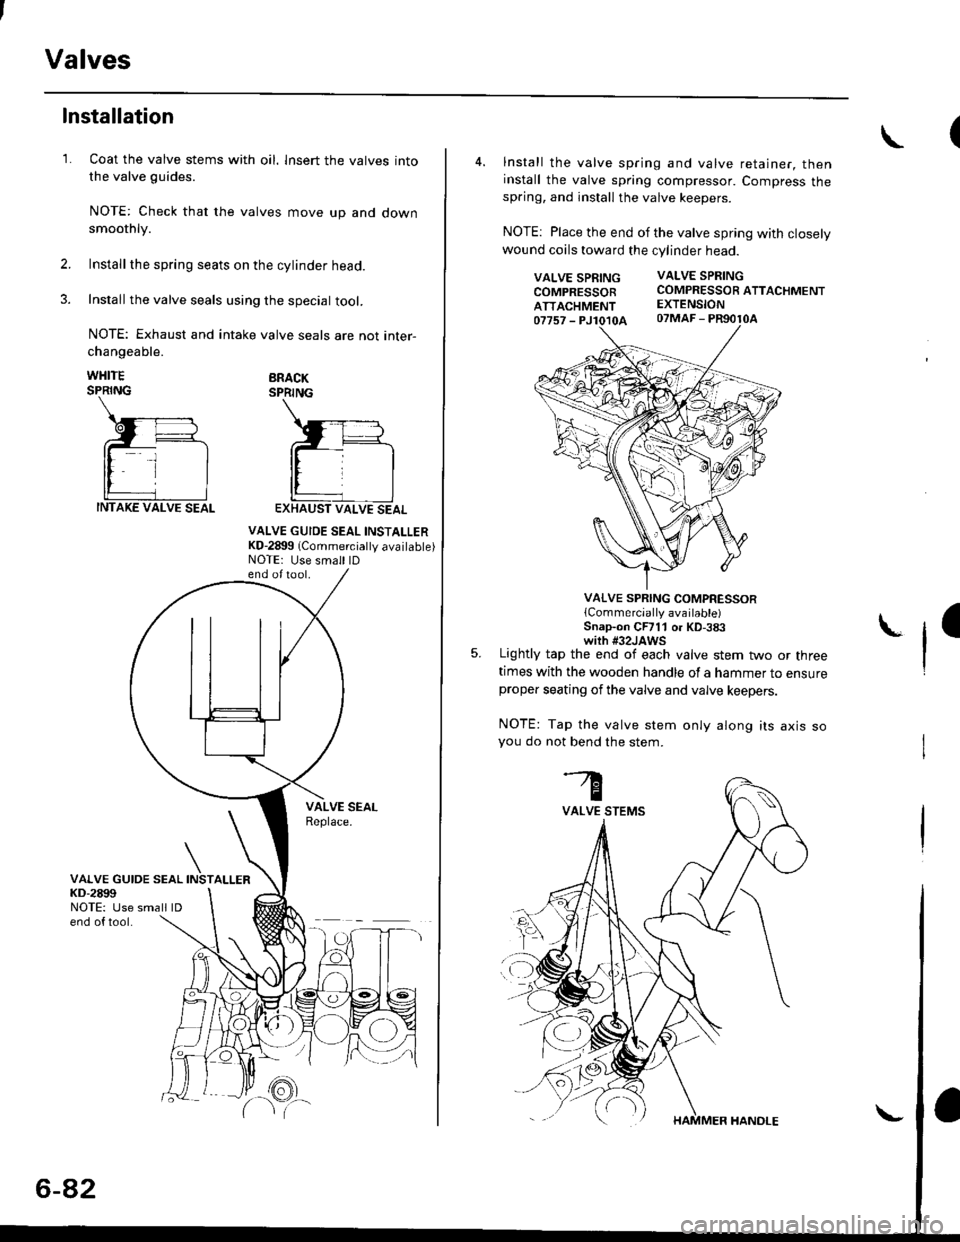 HONDA CIVIC 1996 6.G Workshop Manual Valves
1.
Installation
Coat the valve stems with oil. lnsert the valves into
the valve guides.
NOTE: Check that the valves move up and downsmoothly.
Installthe spring seats on the cylinder head.
Insta